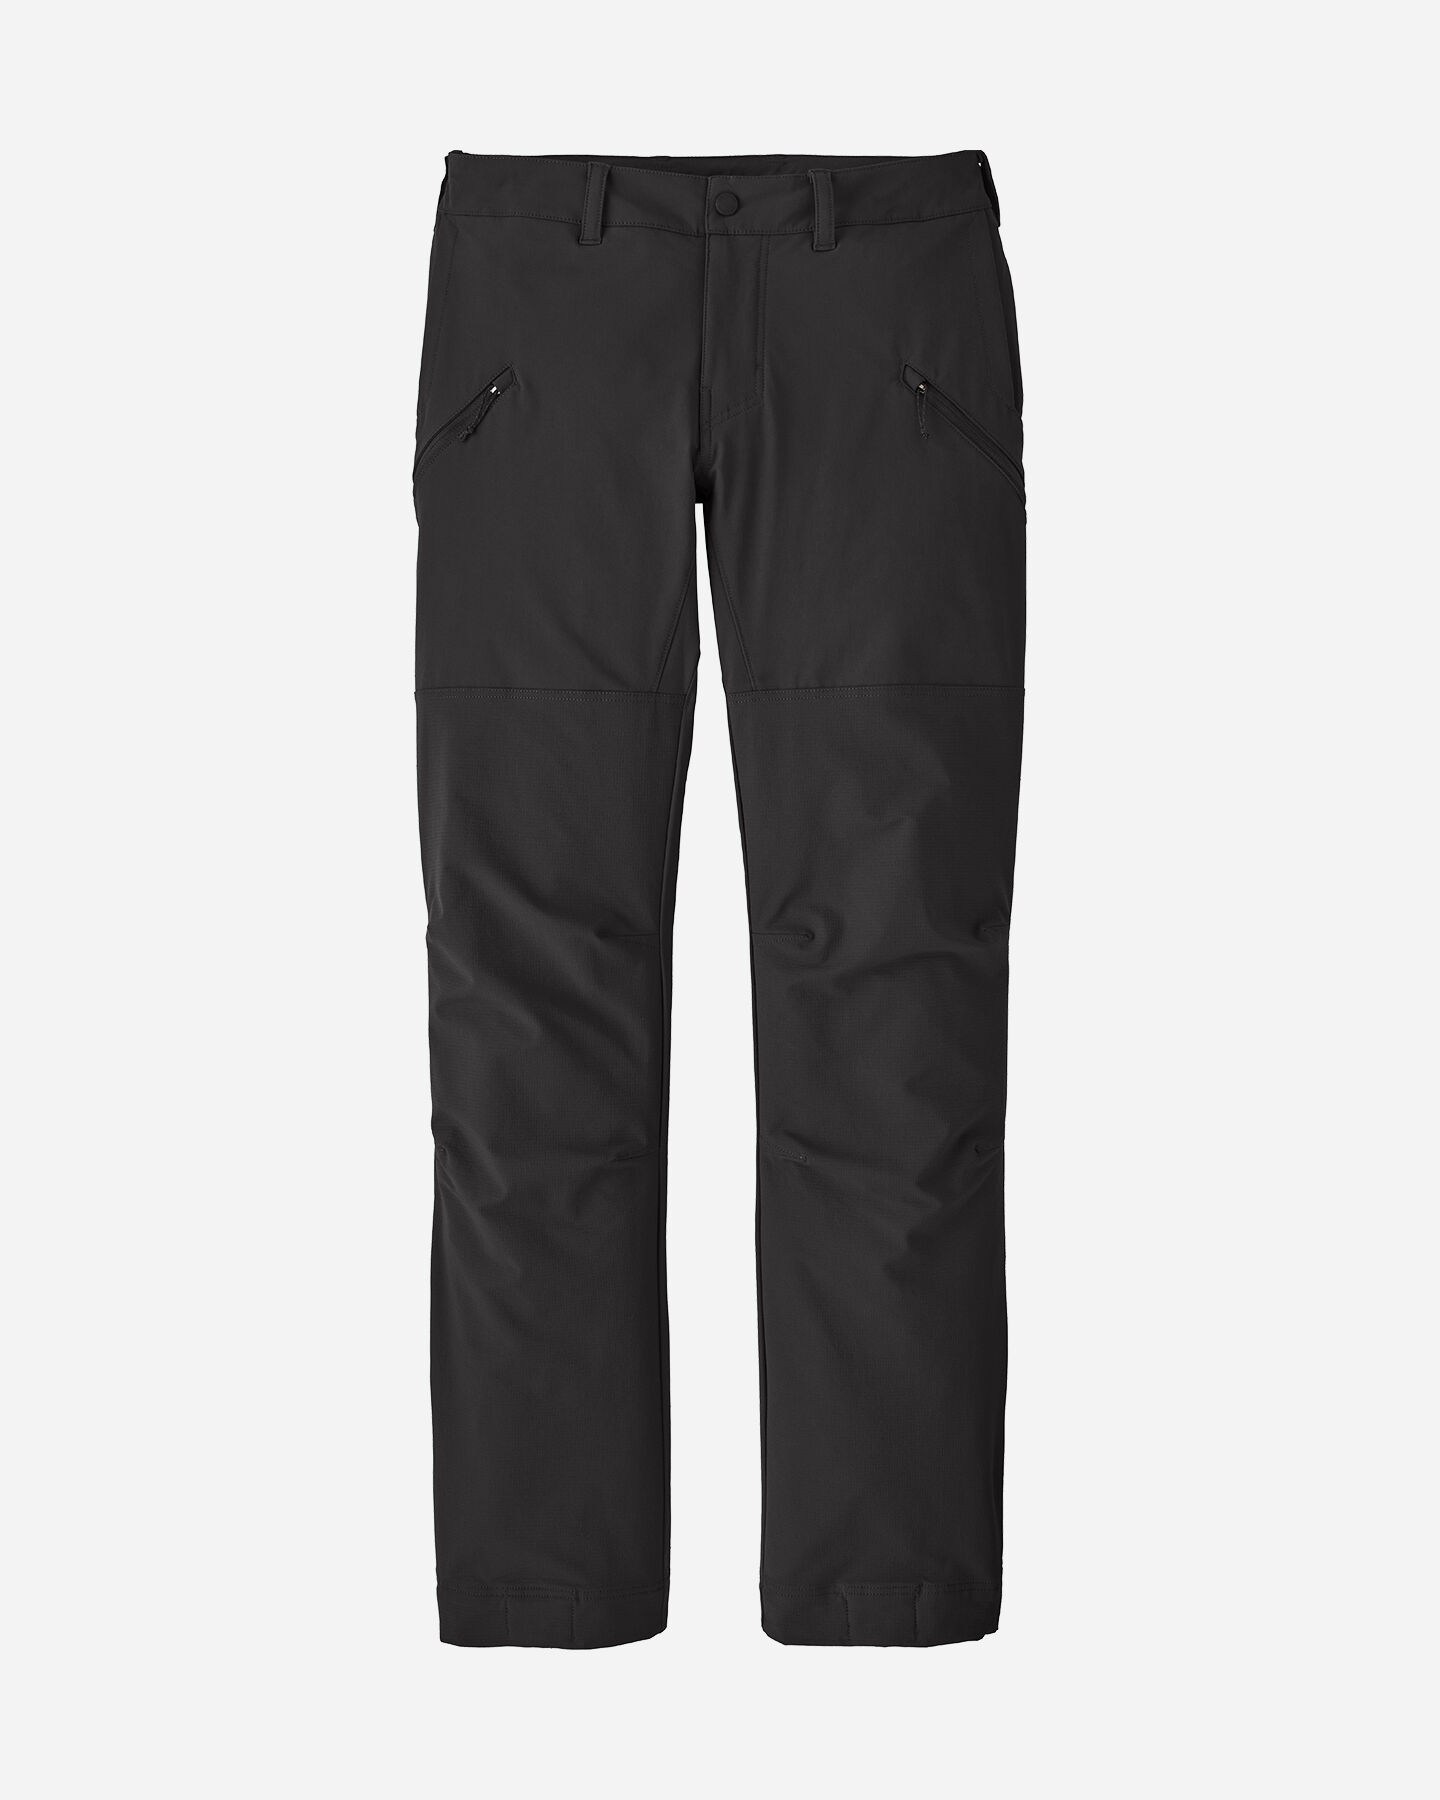  Pantalone outdoor PATAGONIA POINT PEAK TRAIL W S5443260|BLK|4 scatto 0